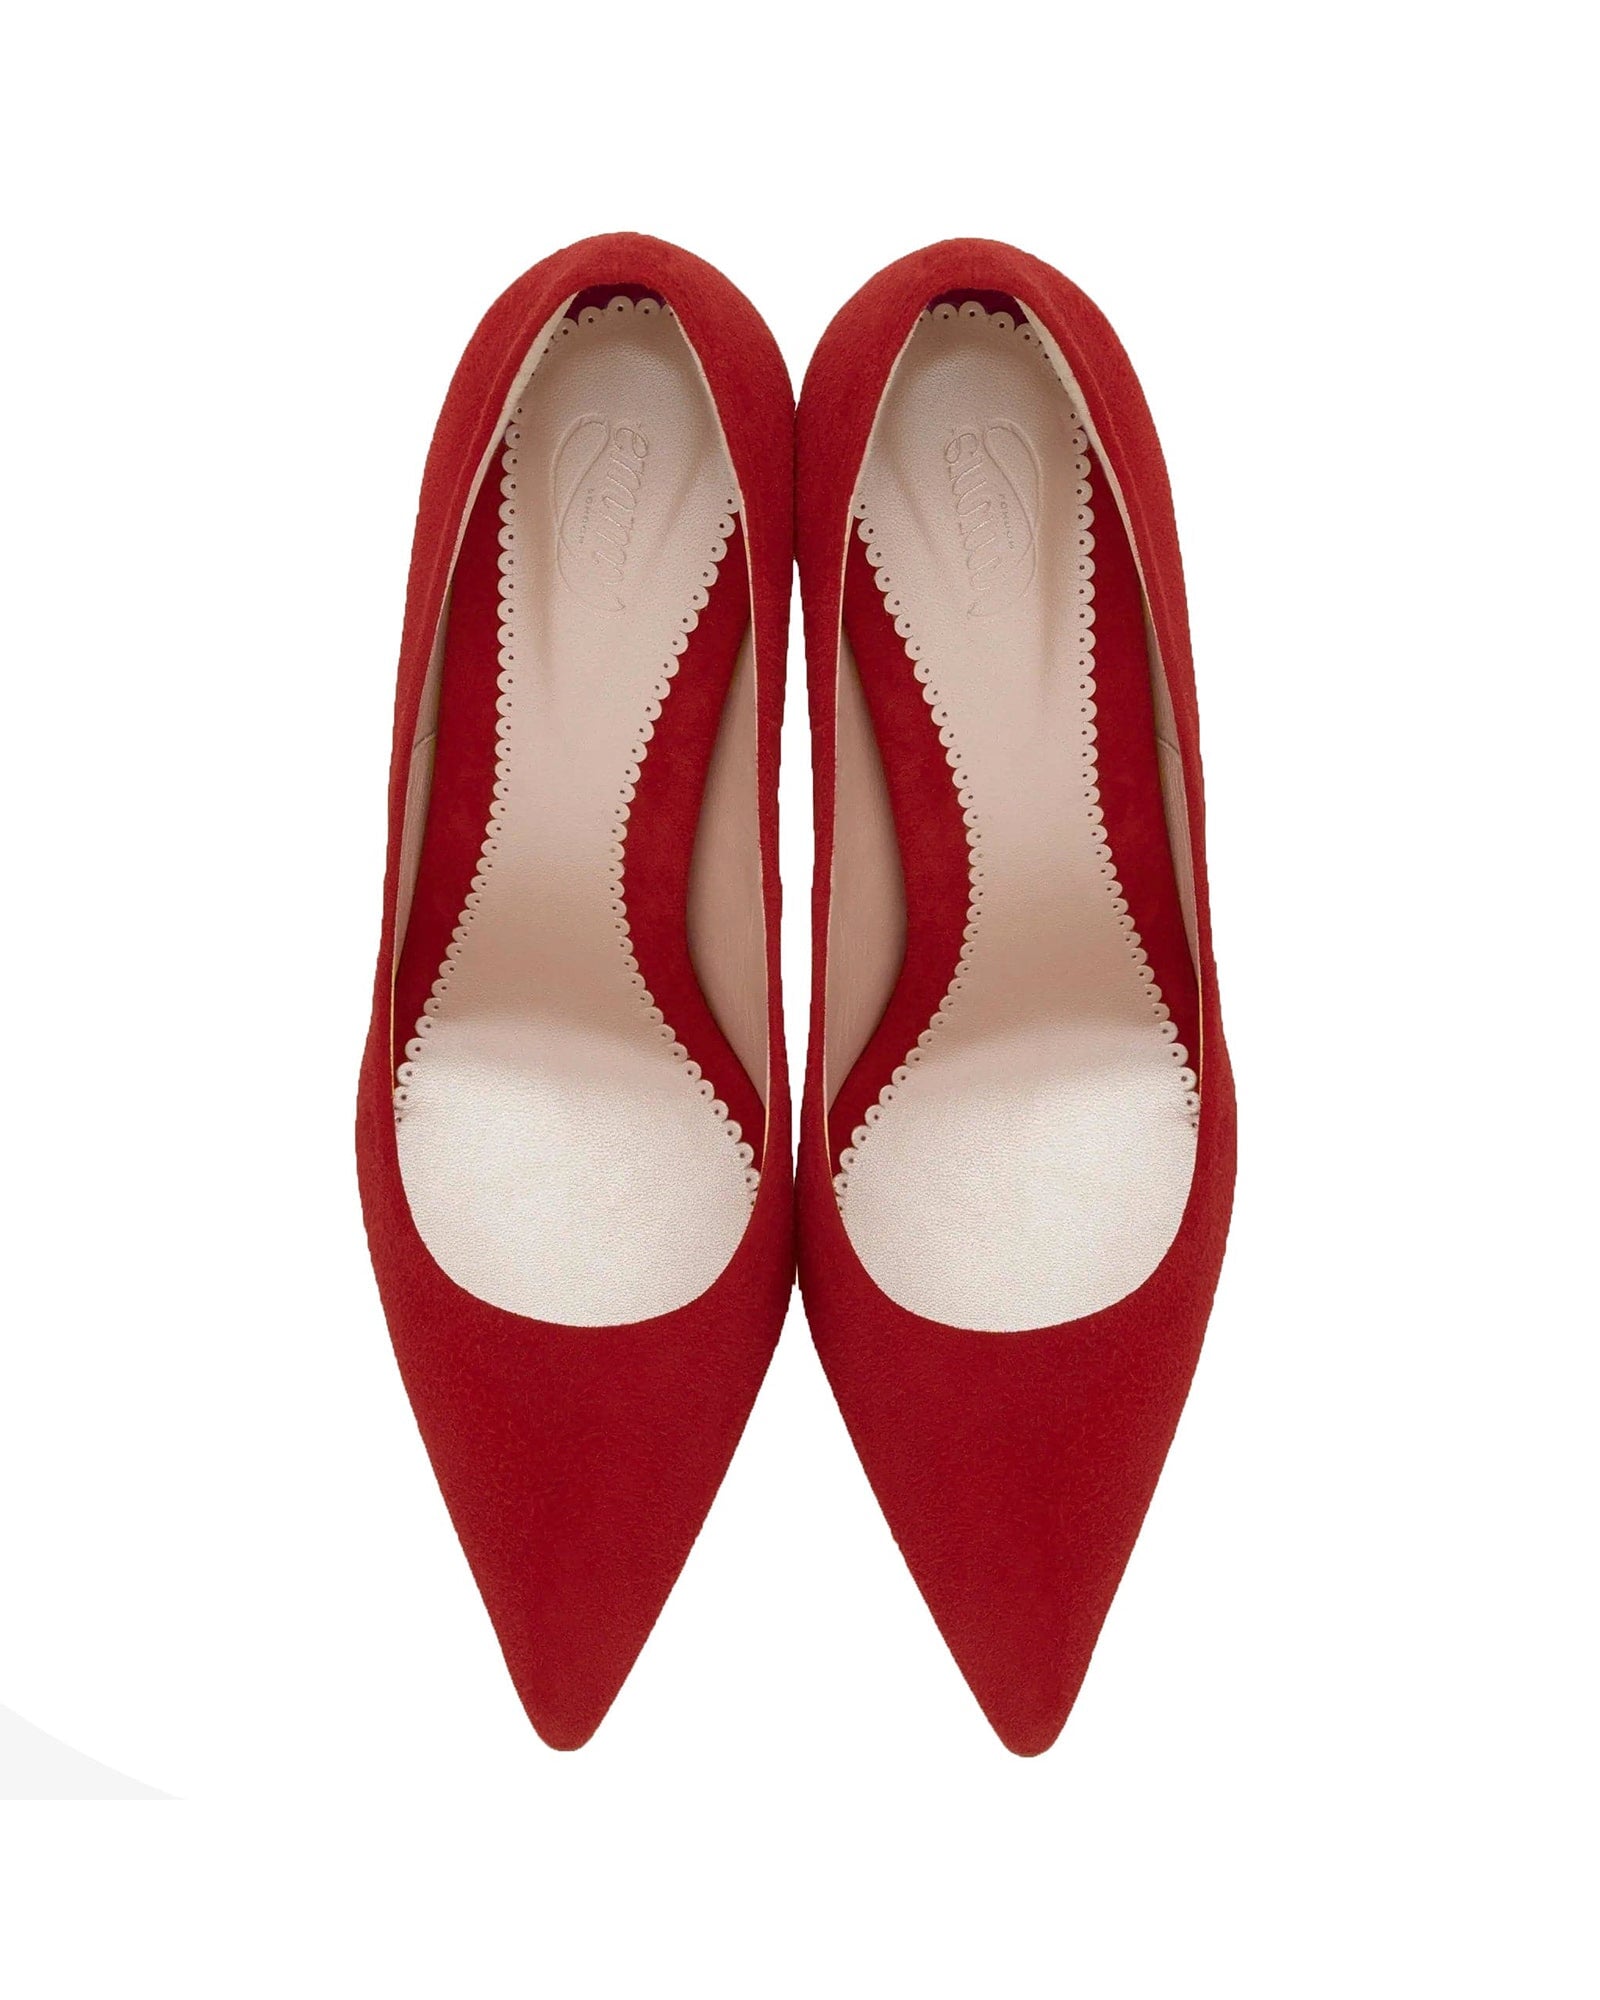 Rebecca Candy Fashion Shoe Bright Red Pointed High Heel Court  image